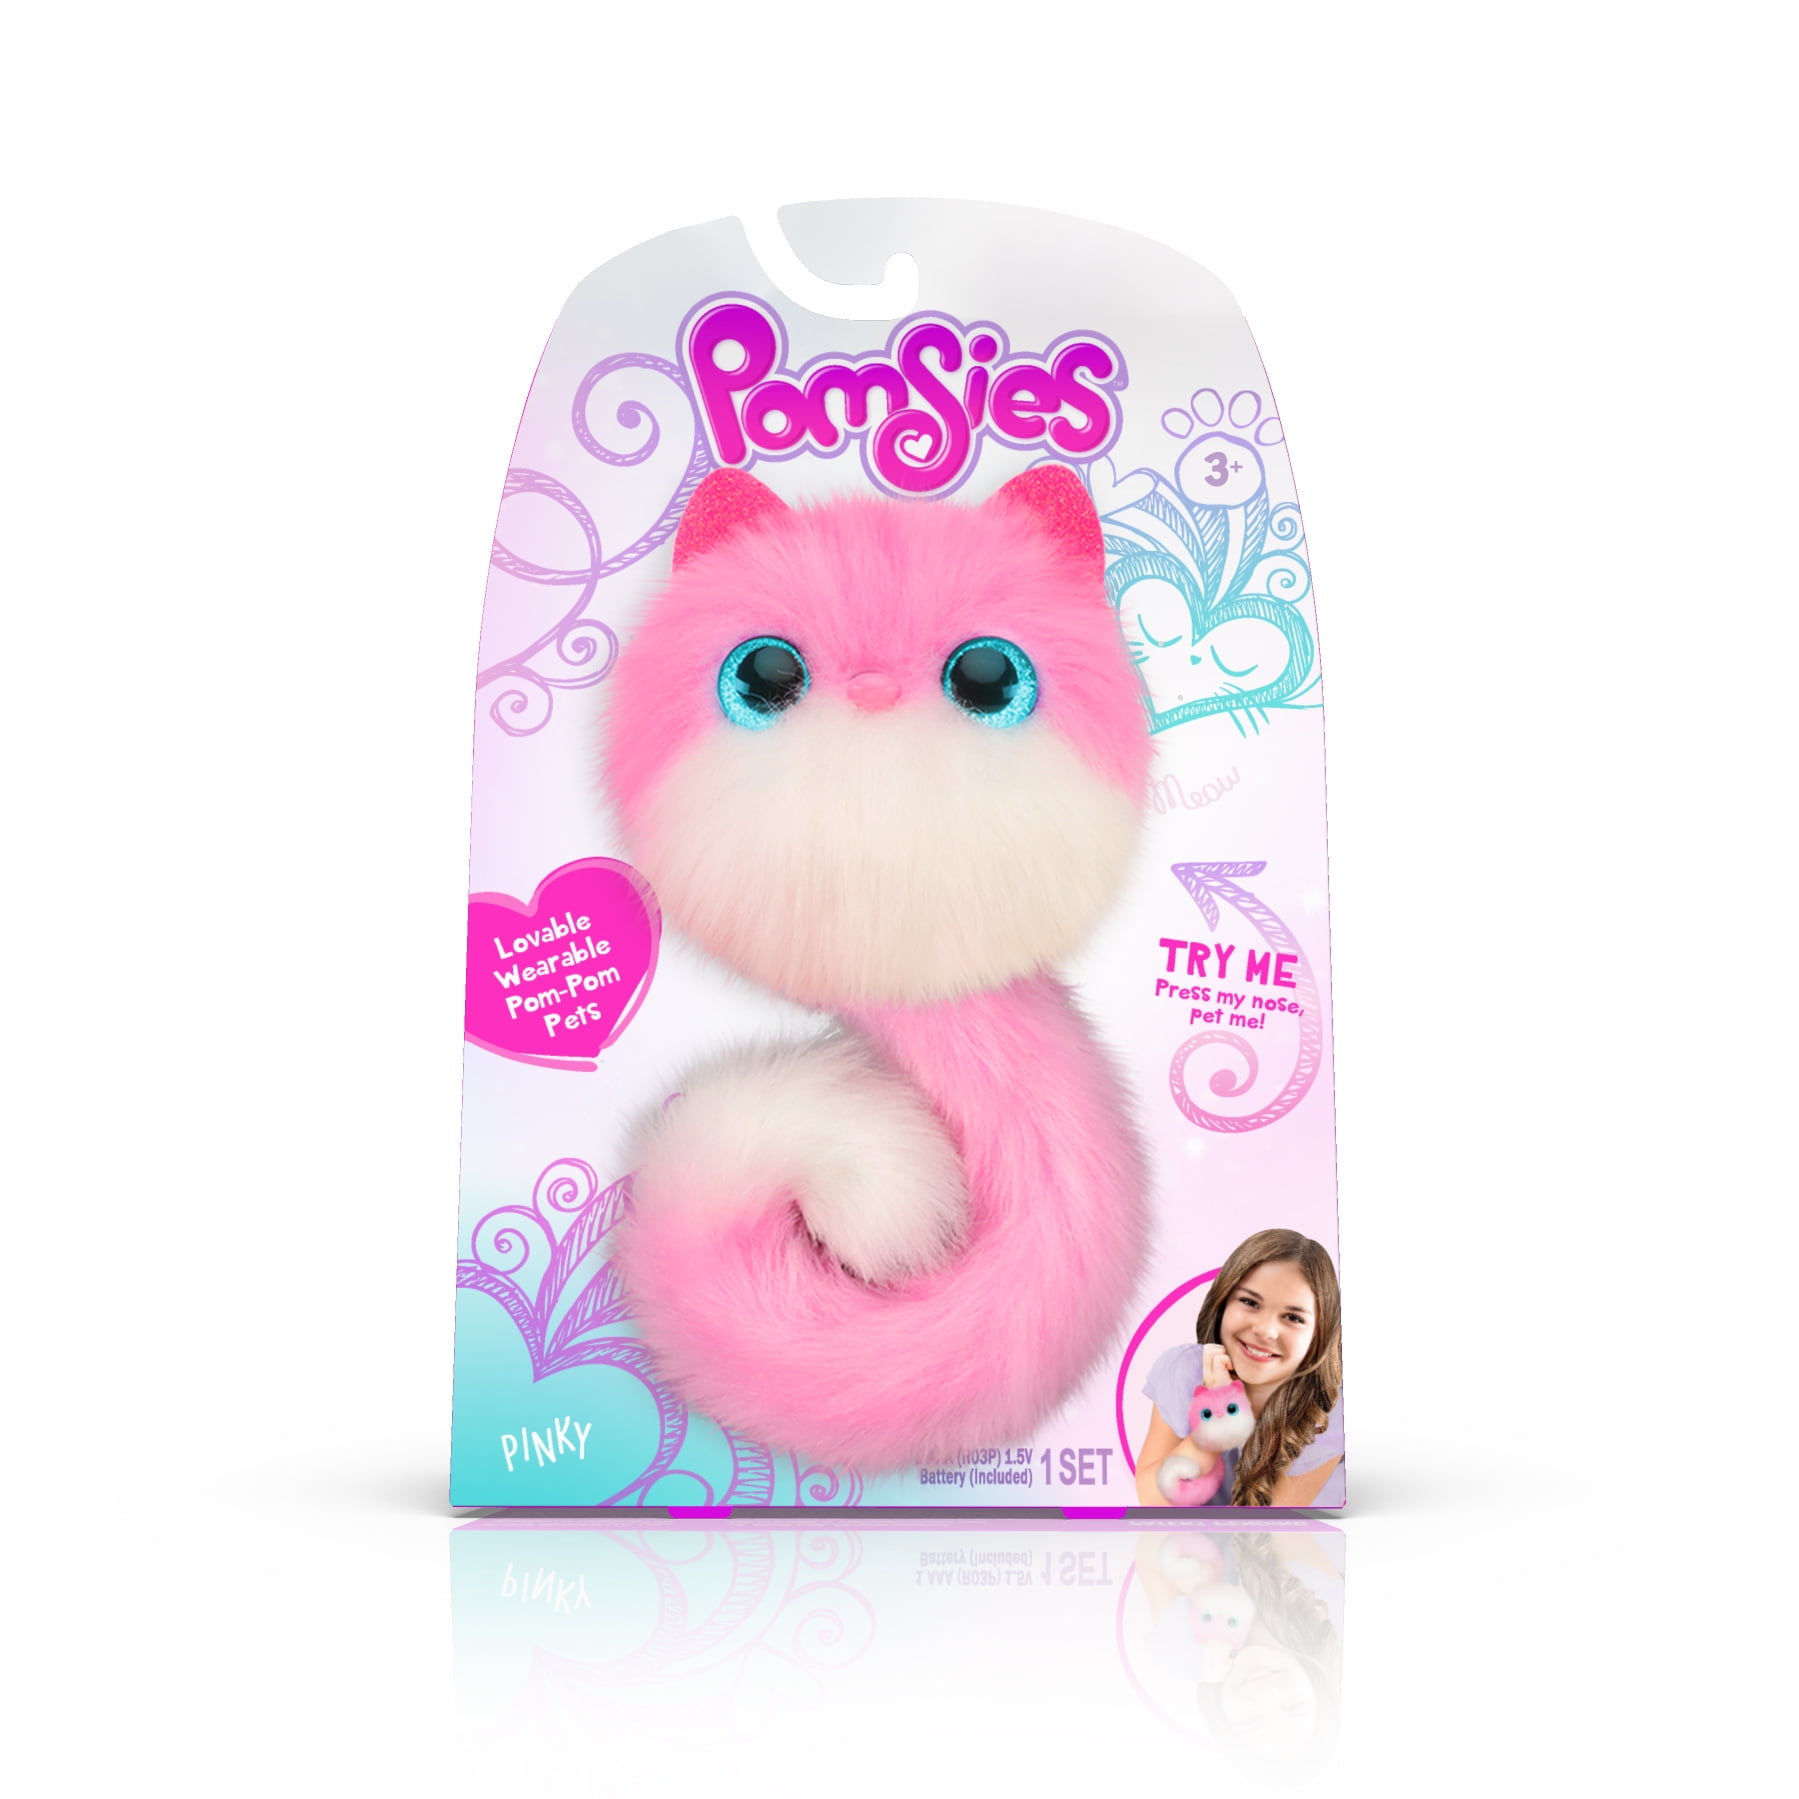 Pomsies Pet Boots Furry Plush Interactive Girls Toy Purple with Brush 